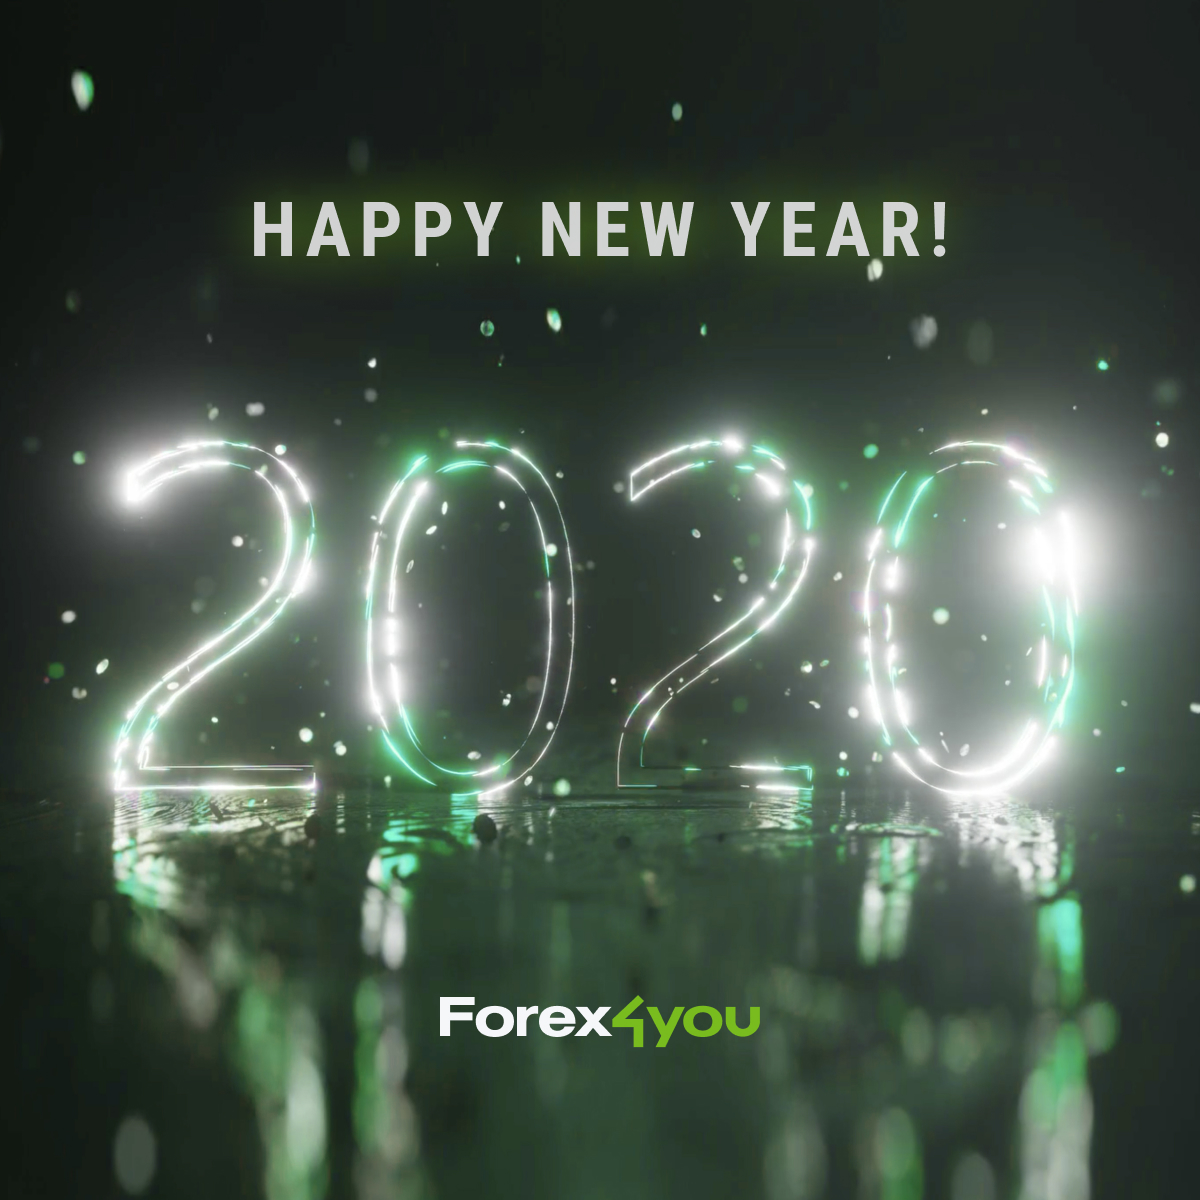 Forex4you 2020 New Year Wish!